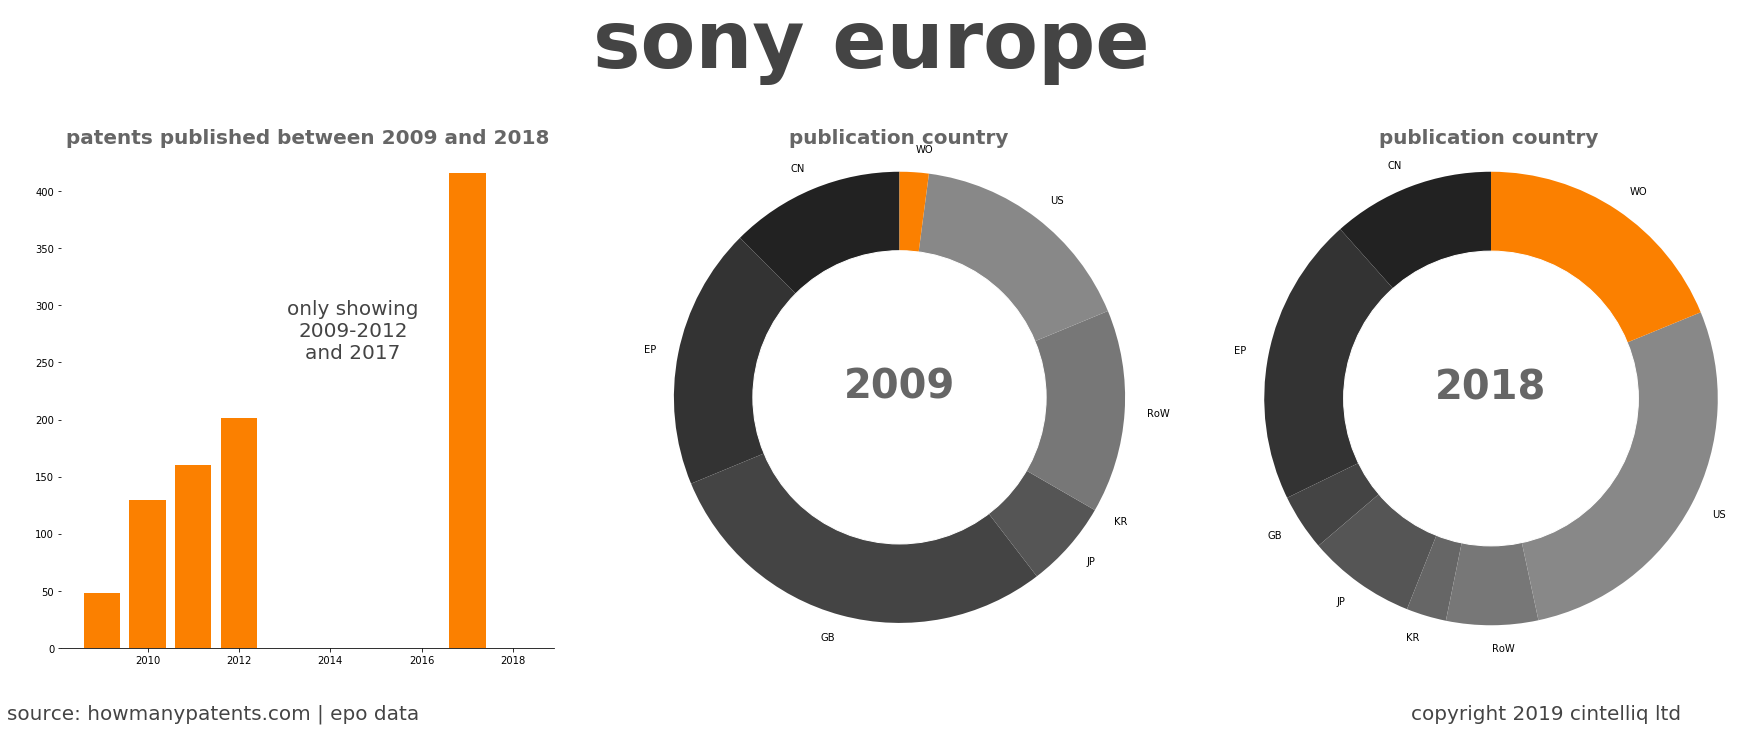 summary of patents for Sony Europe